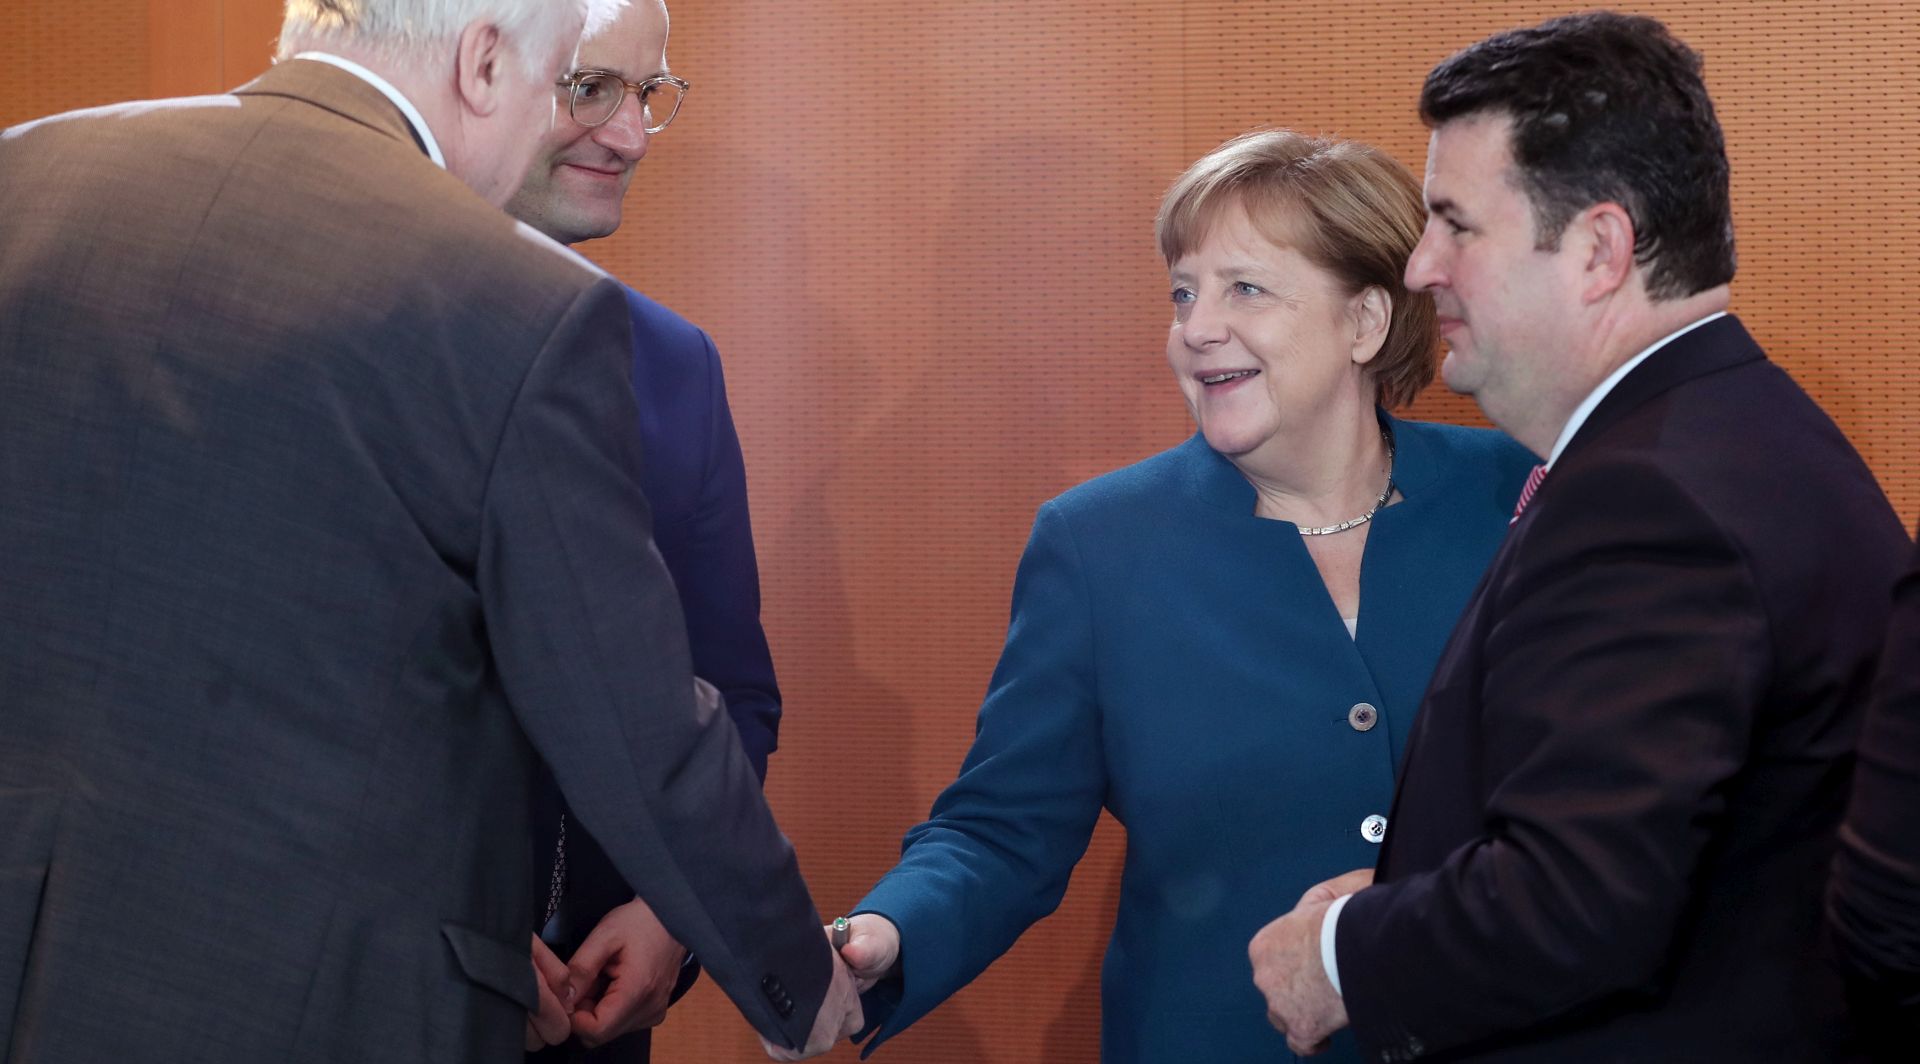 epa07609298 German Chancellor Angela Merkel greets Minister of the Interior Horst Seehofer (L) next to Minister of Labour and Social Affairs Hubertus Heil (R) and Minister of Health Jens Spahn (2-L) at the beginning of the weekly meeting of the German cabinet at the Chancellery in Berlin, Germany, 29 May 2019. The Federal Cabinet will discuss environmental politics.  EPA/FELIPE TRUEBA